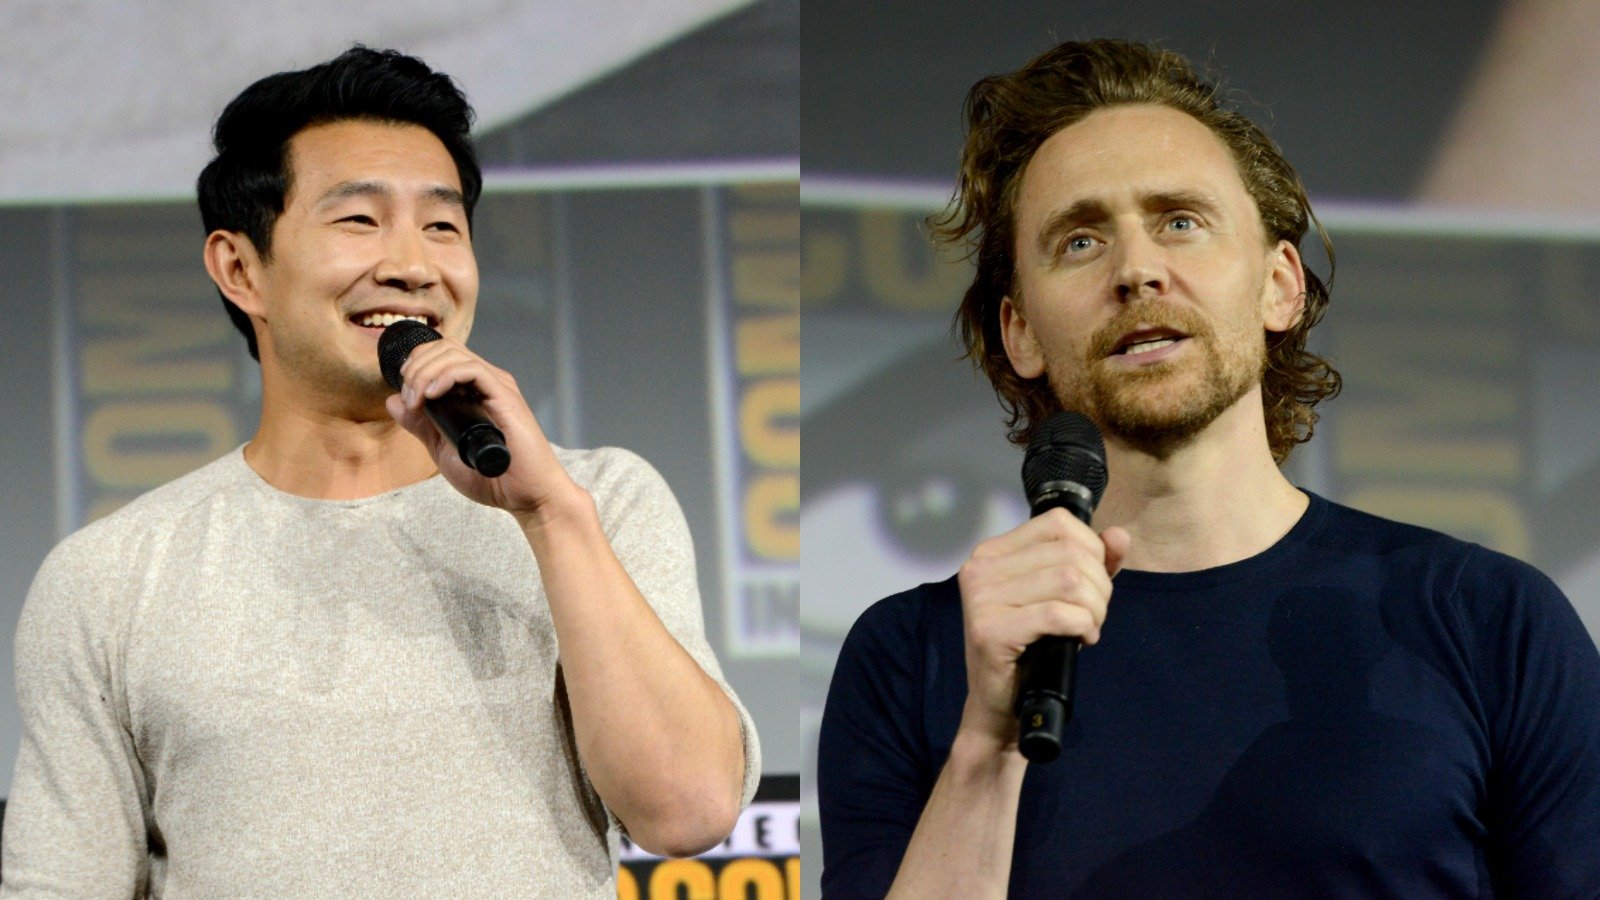 (L-R): Simu Liu holds a microphone on-stage at Comic-Con; Tom Hiddleston holds a microphone at Comic-Con 2019